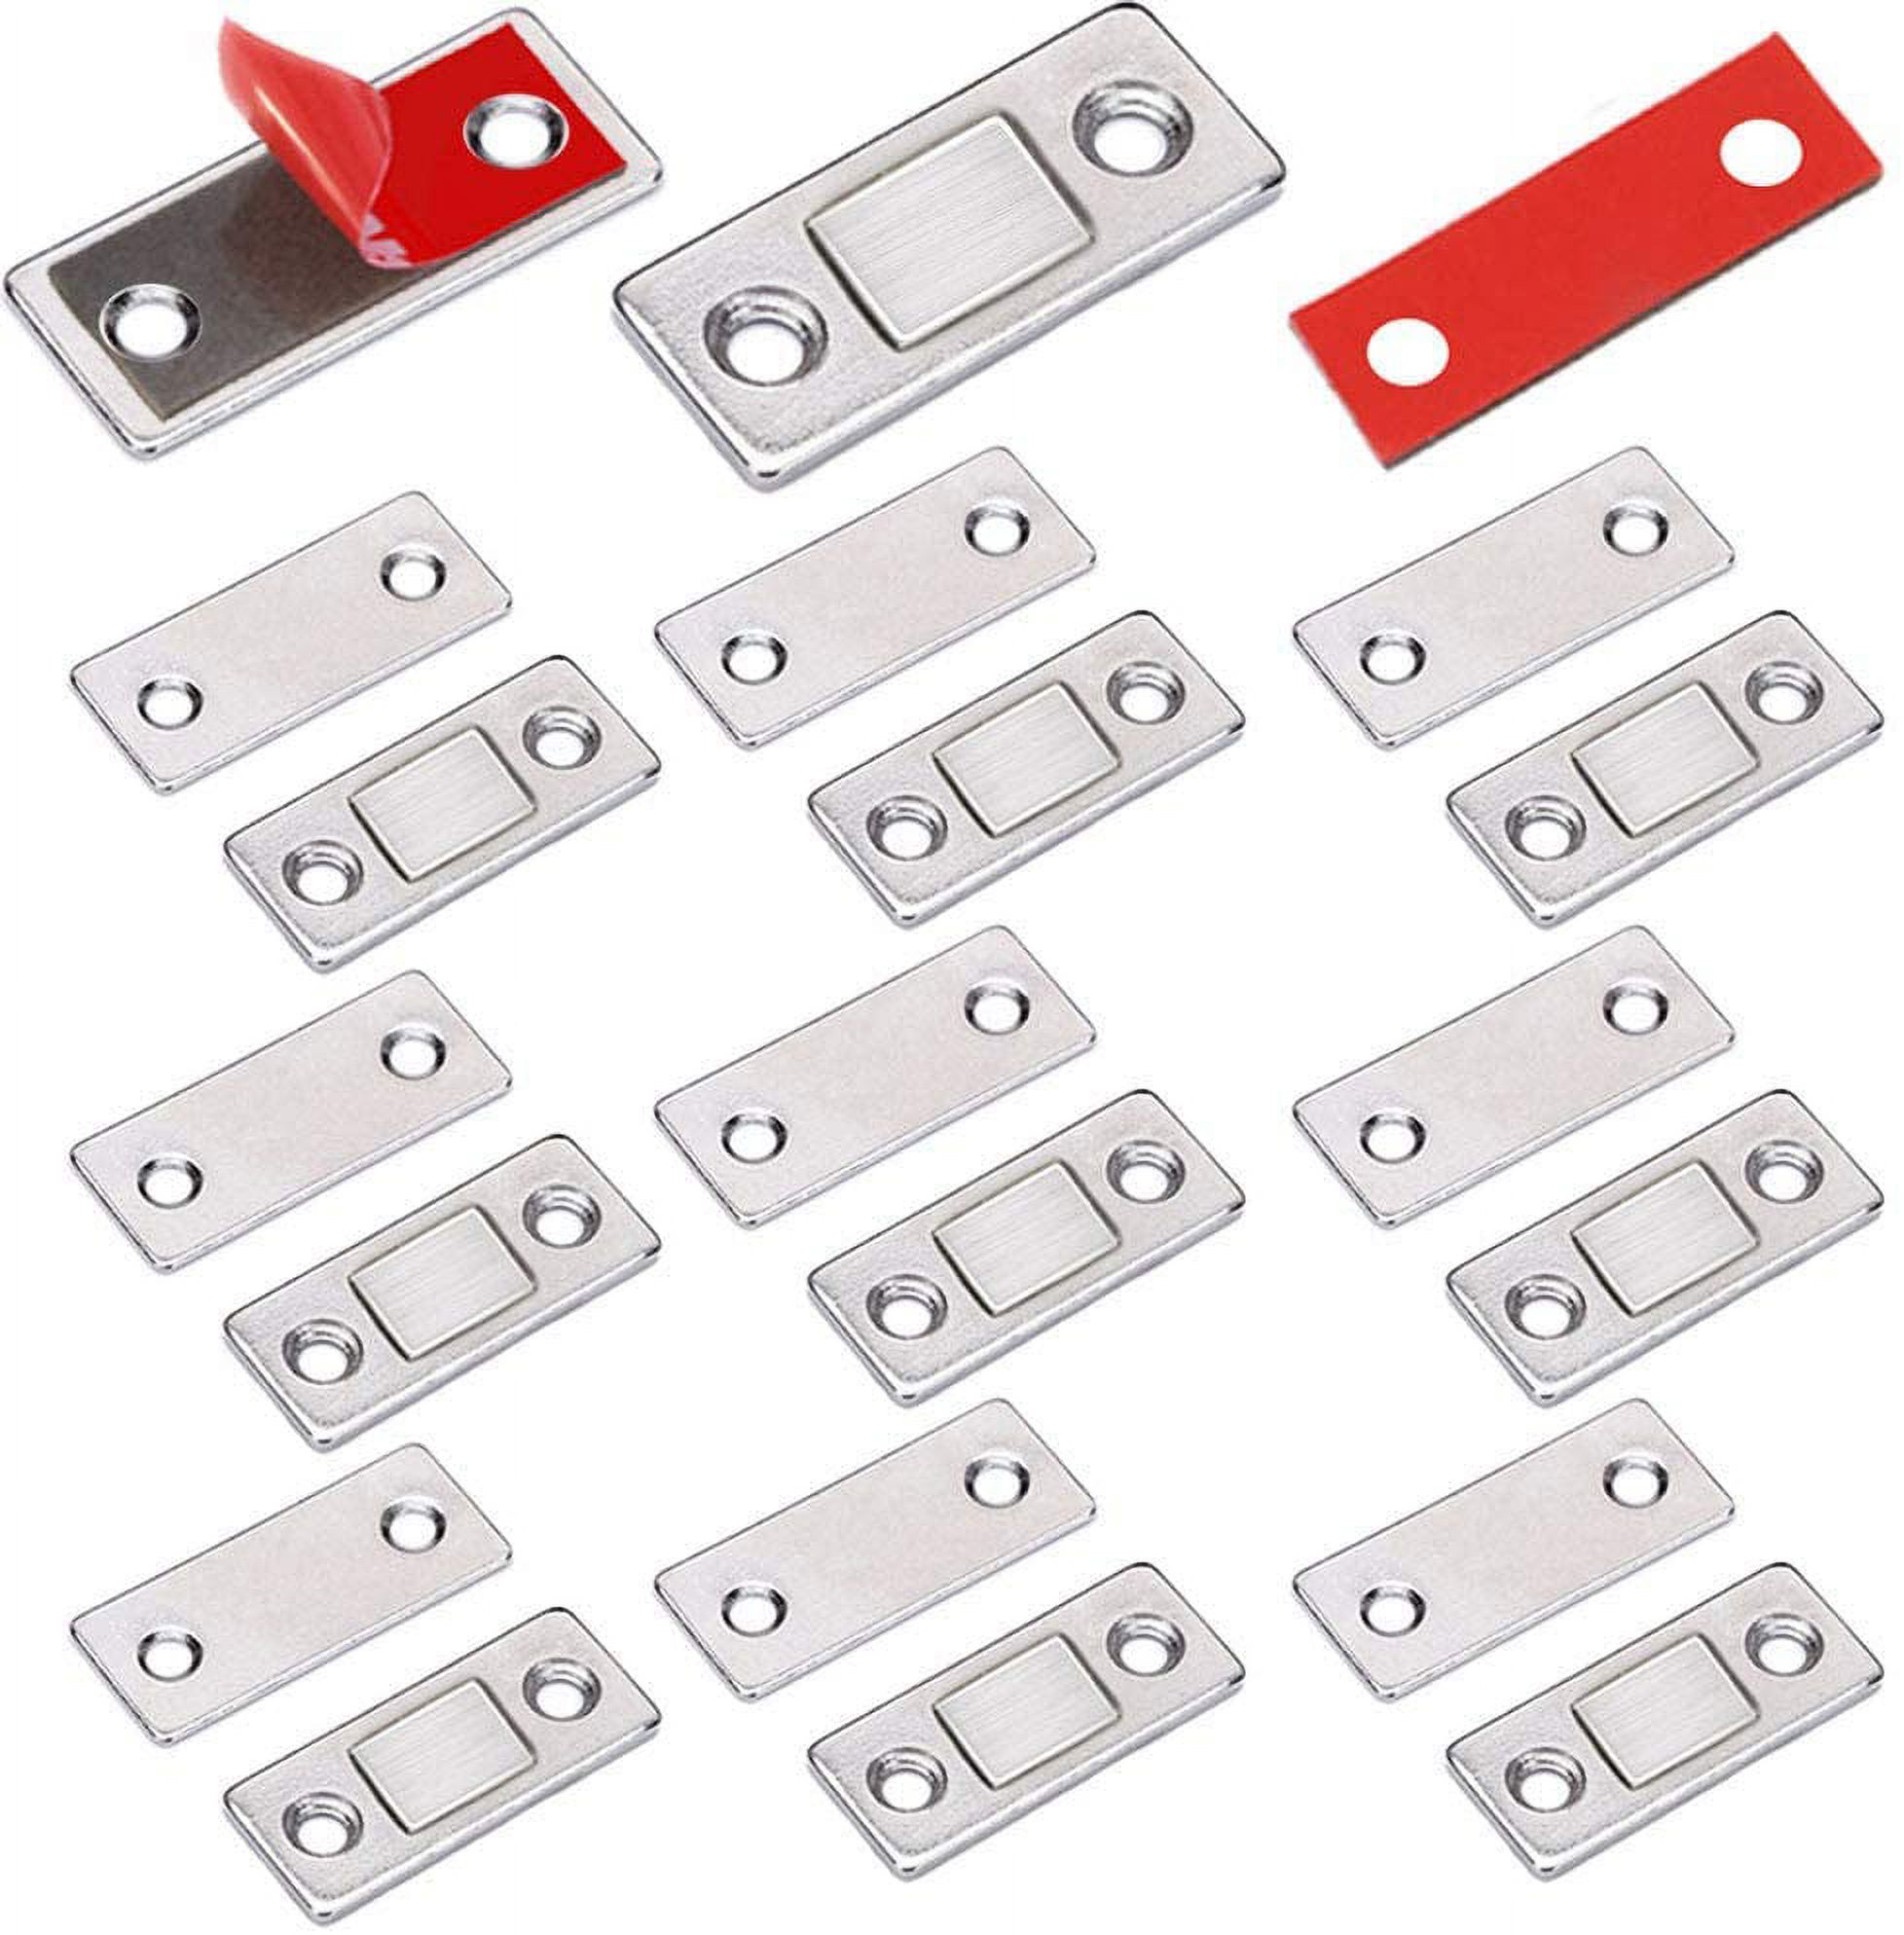 Cabinet Door Magnets 10 Pack Ultra Thin Magnetic Catch Stainless Steel Drawer Magnet Sliding Closure Kitchen Closer Cupboard Closet Latches Hardware E715614e 2de0 4d0c 97fe D62f38e9ed4c.ef98411b4386f8db3706f2ae21a32b4d ?odnHeight=117&odnWidth=117&odnBg=FFFFFF